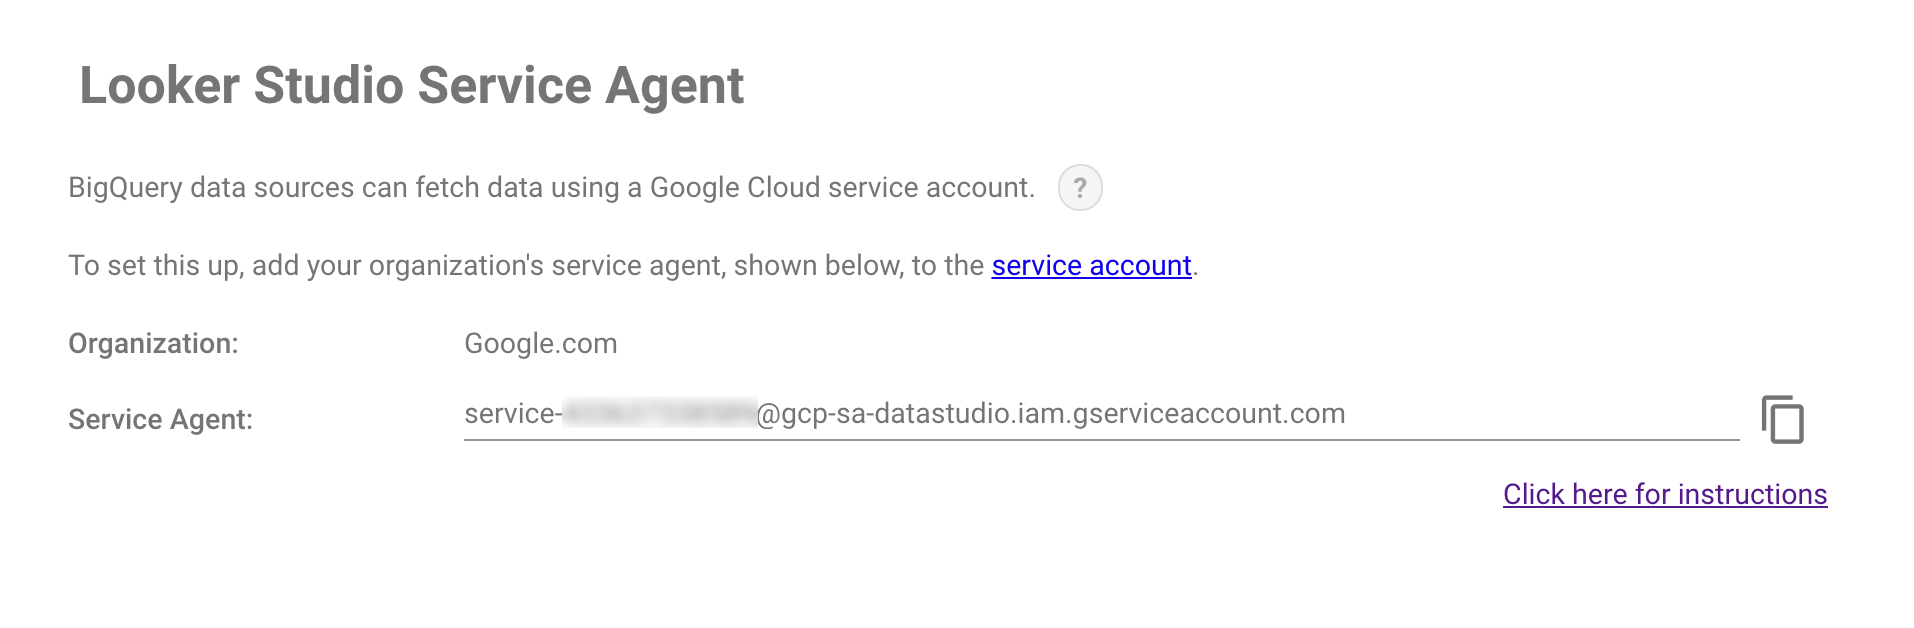 The Looker Studio Service Agent page displays the service agent email address that is required to set up a service account to access your data.